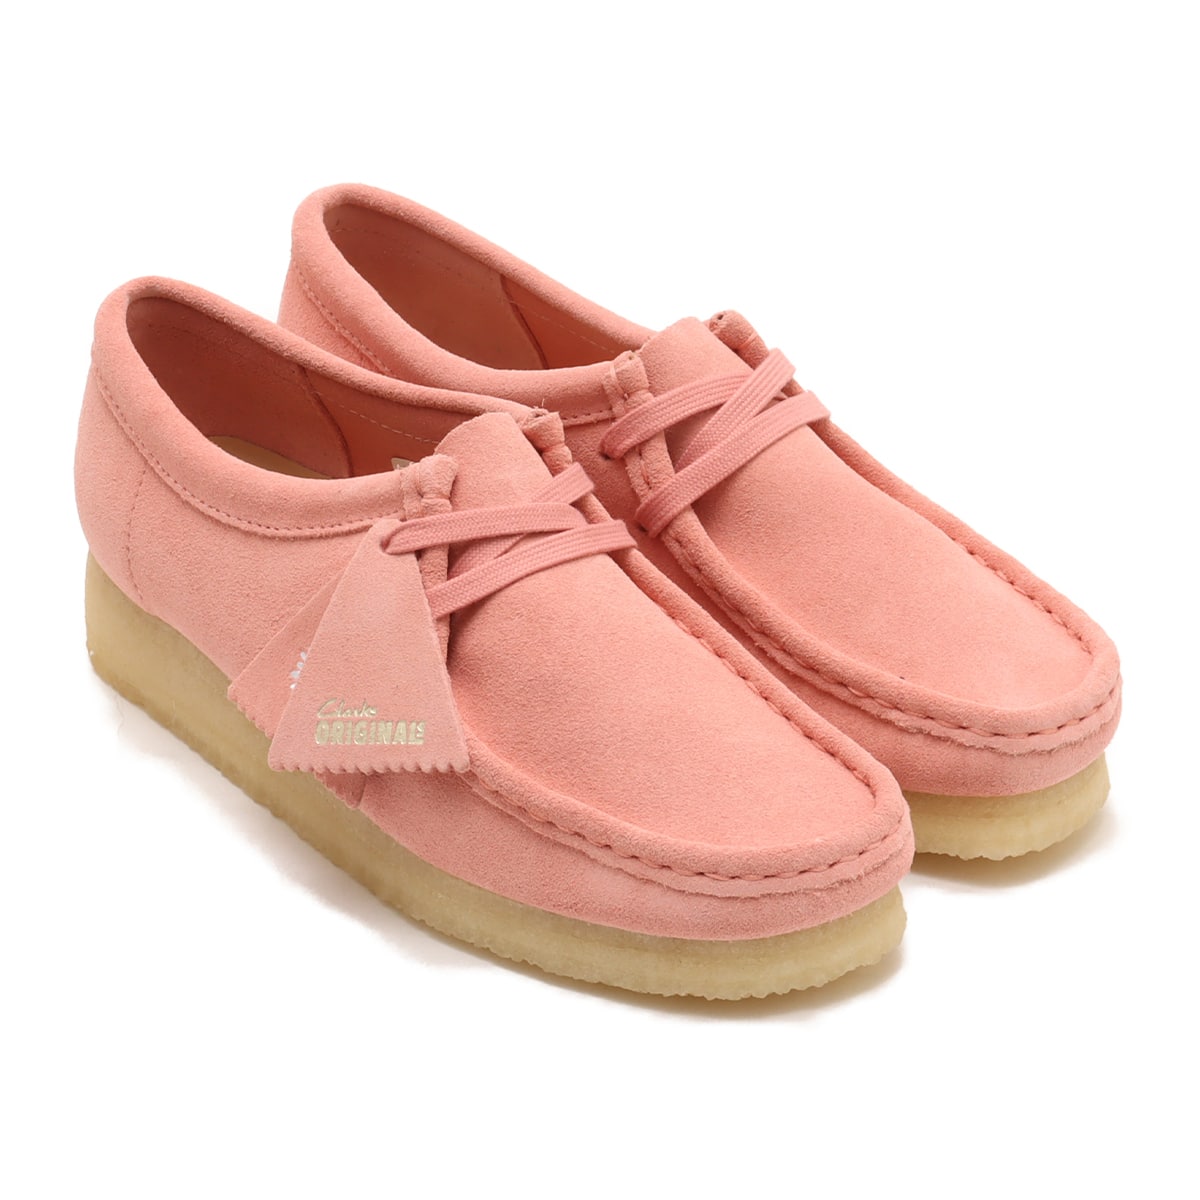 CLARKS Wallabee Blush Pink Suede 24SP-I